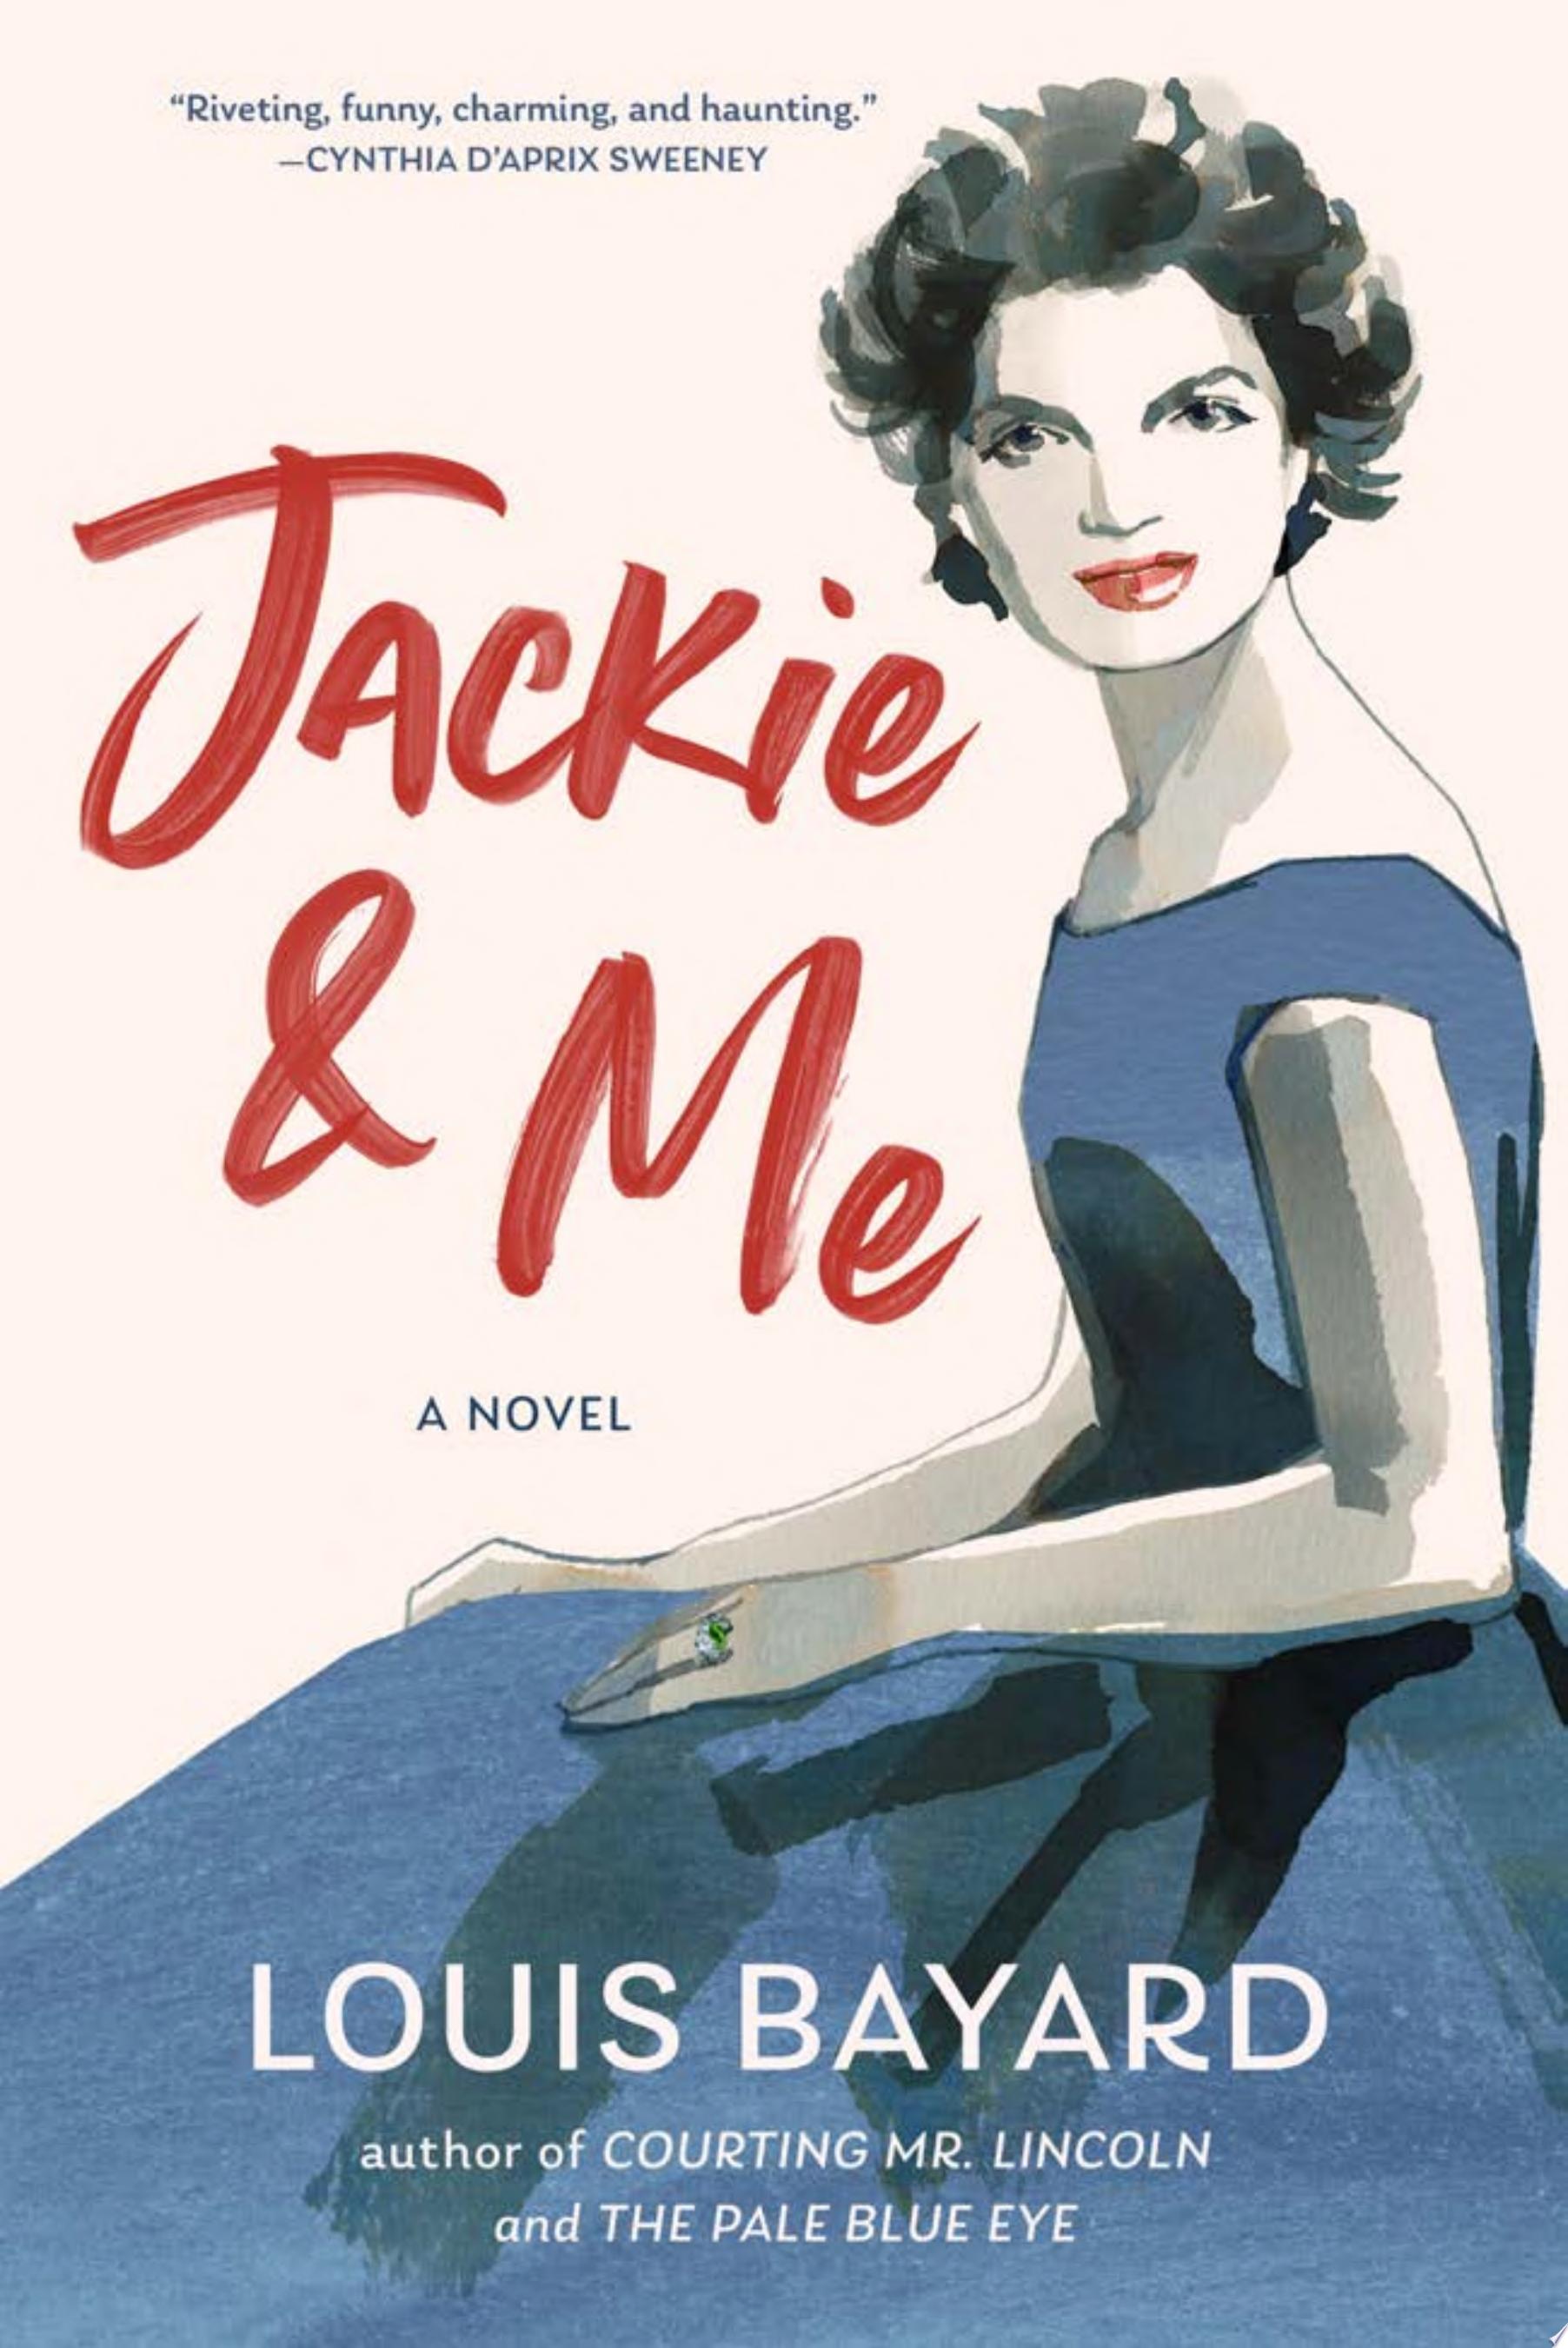 Image for "Jackie & Me"